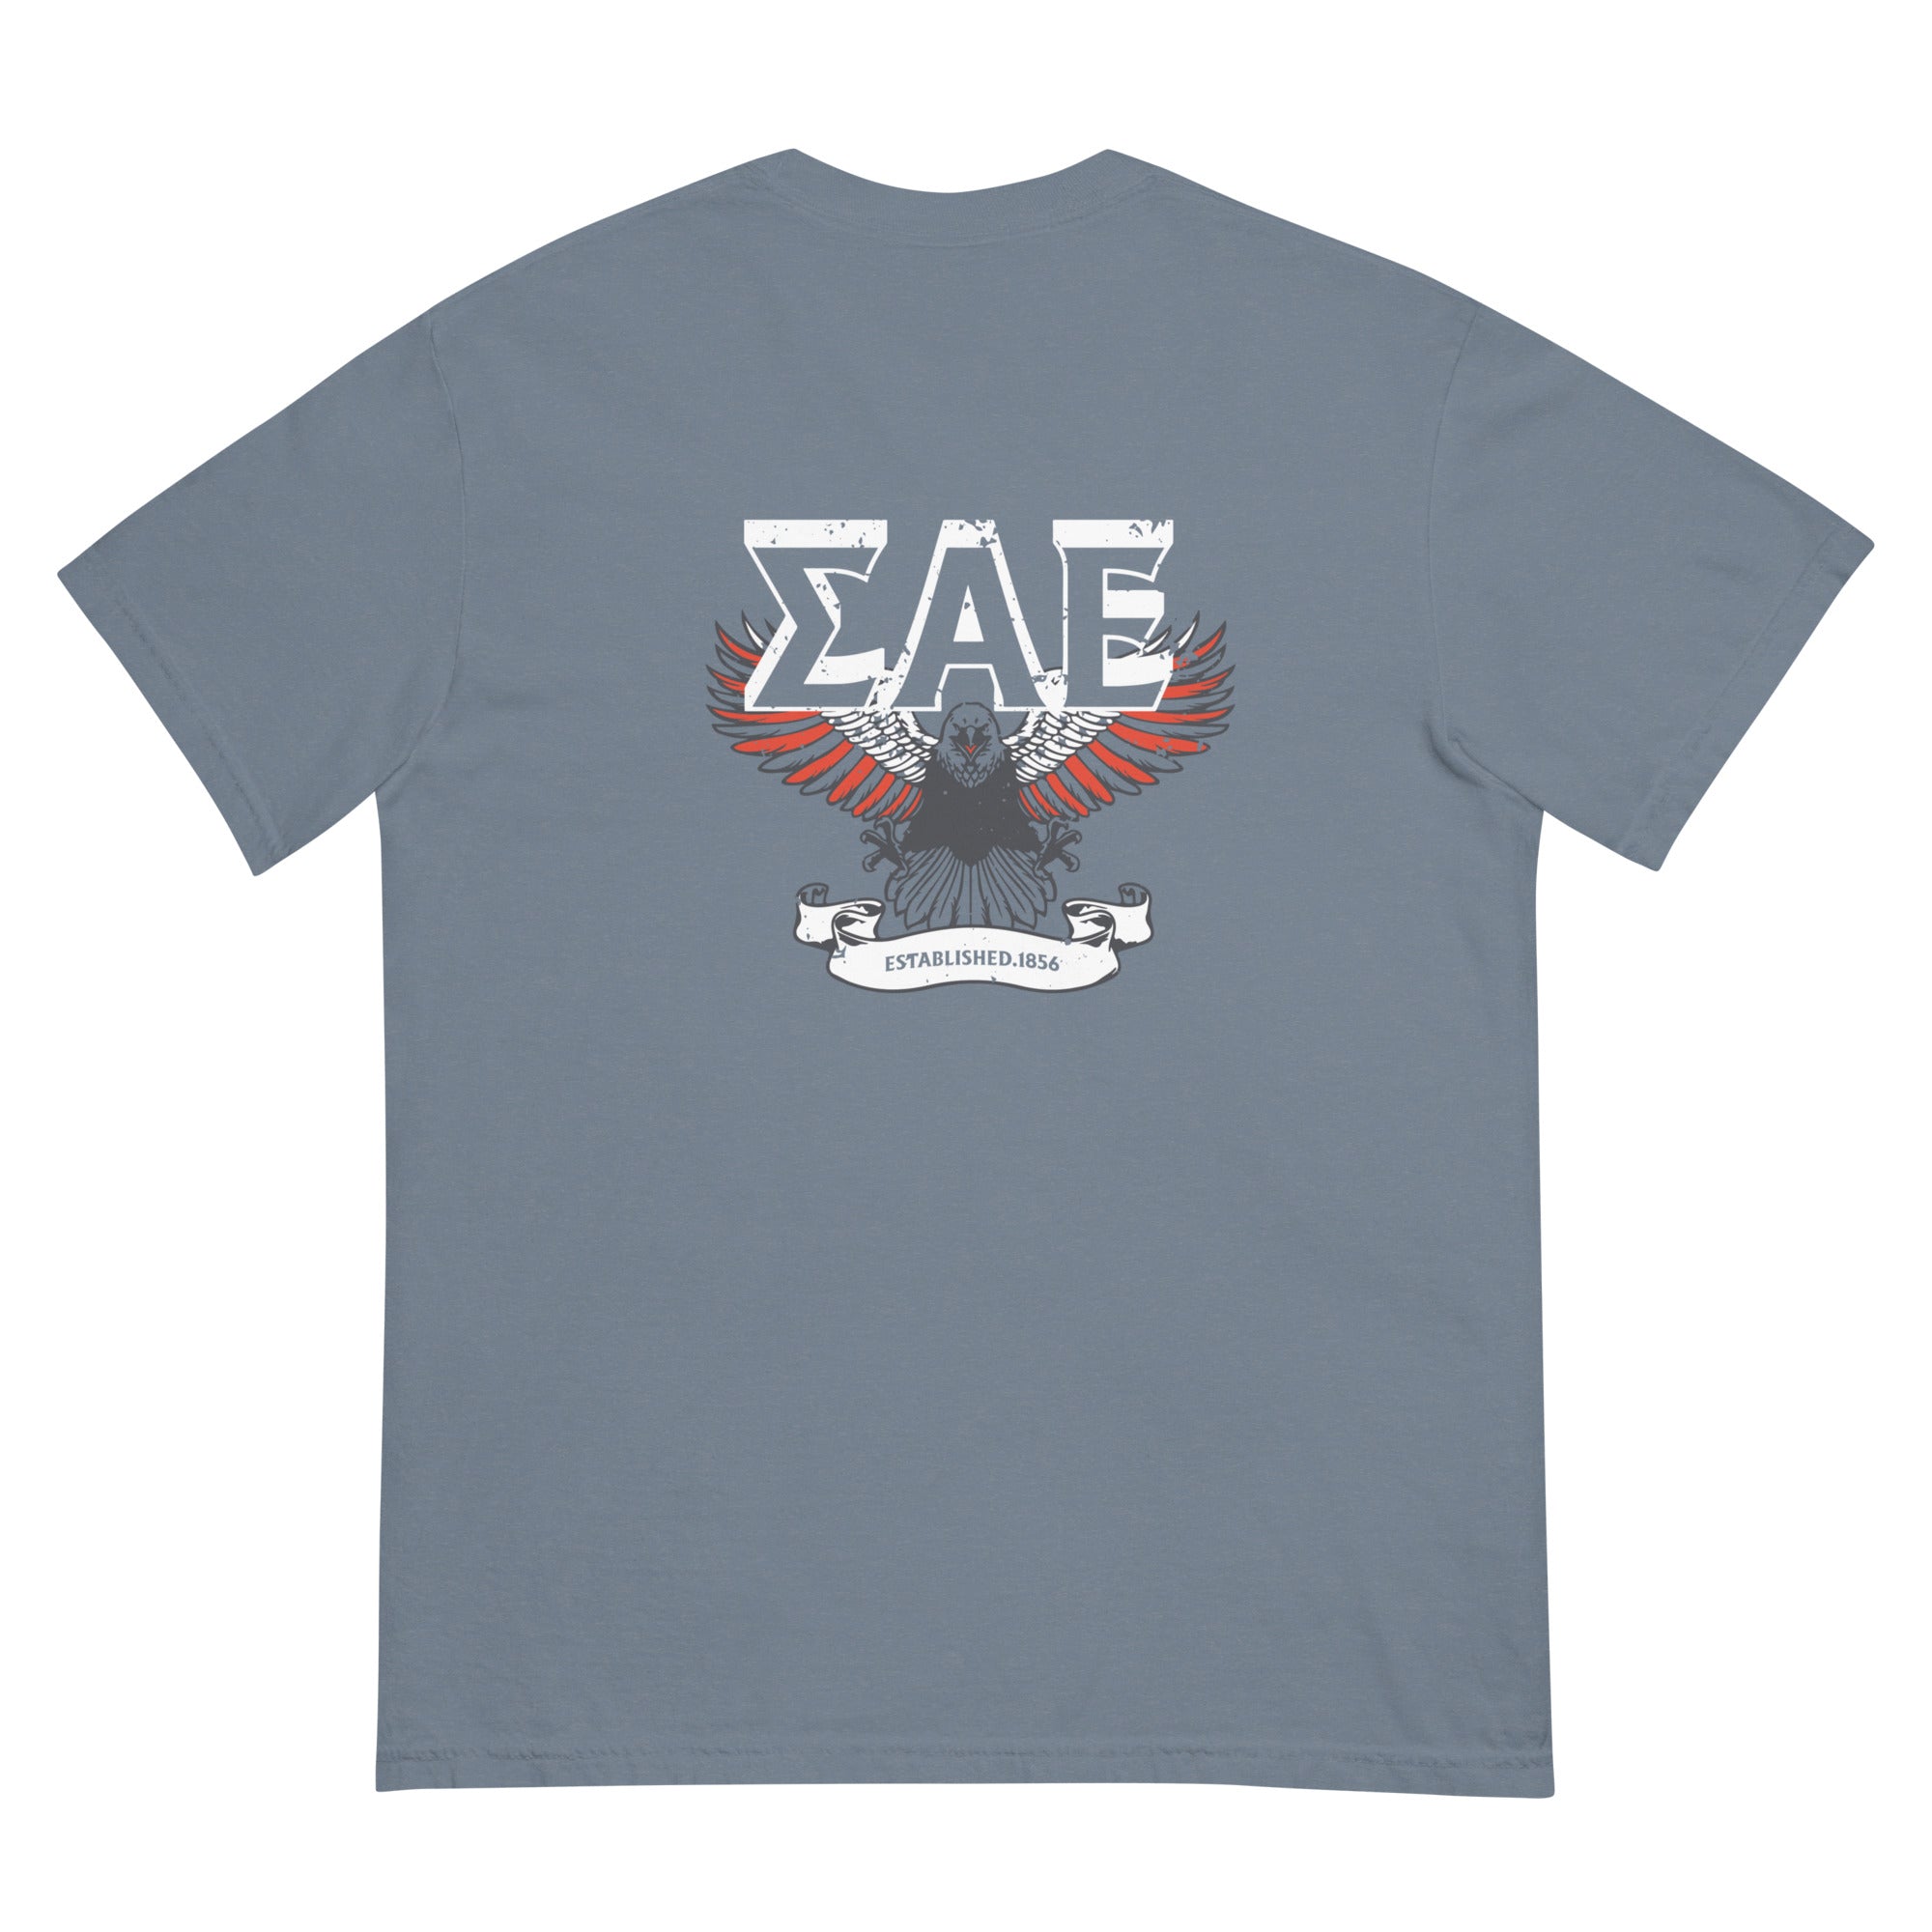 LIMITED RELEASE: SAE Fourth of July - The Sigma Alpha Epsilon Store